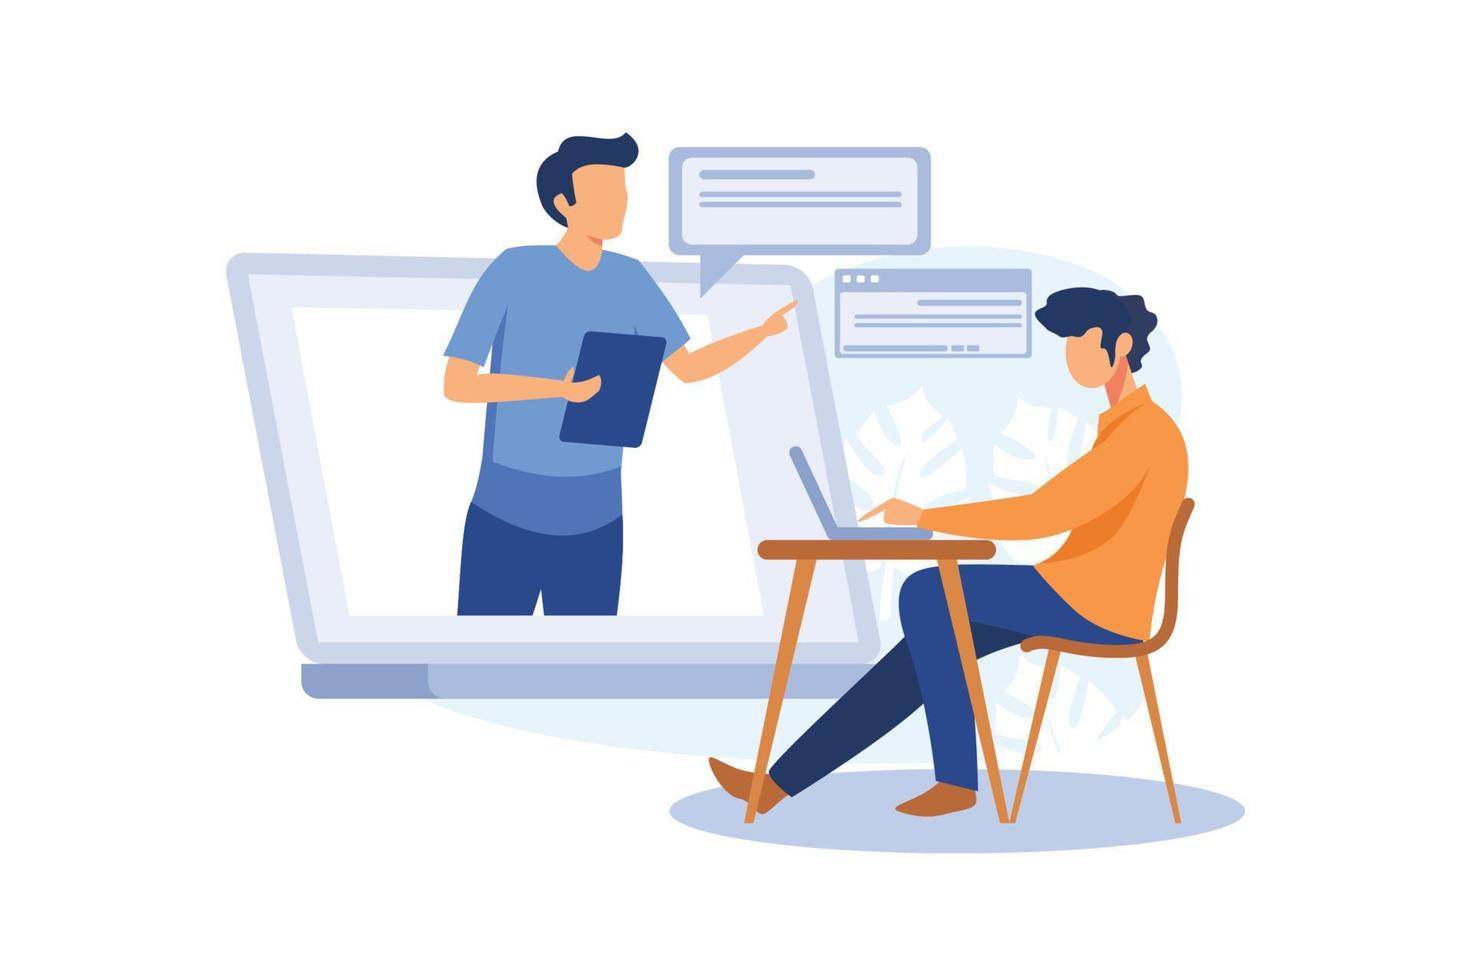 Online communication, negotiations via Internet connection, study and work from home office, online with the whole world vector illustration concept.